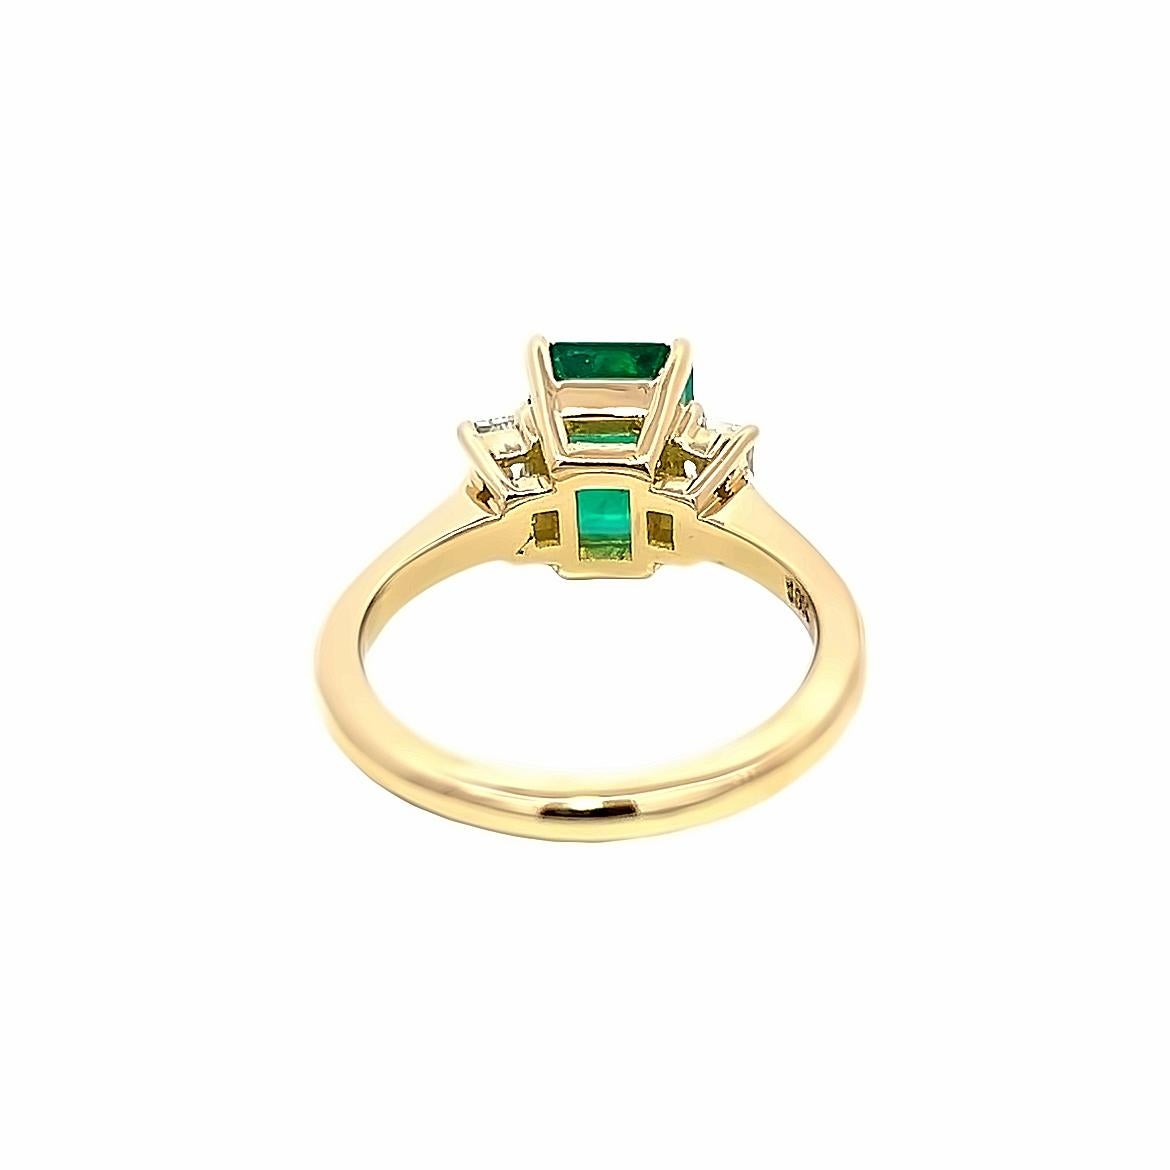 Emerald Cut 1.98CT Octagonal Emerald with Diamonds Ring, GIA Certified, set in 18K YG For Sale